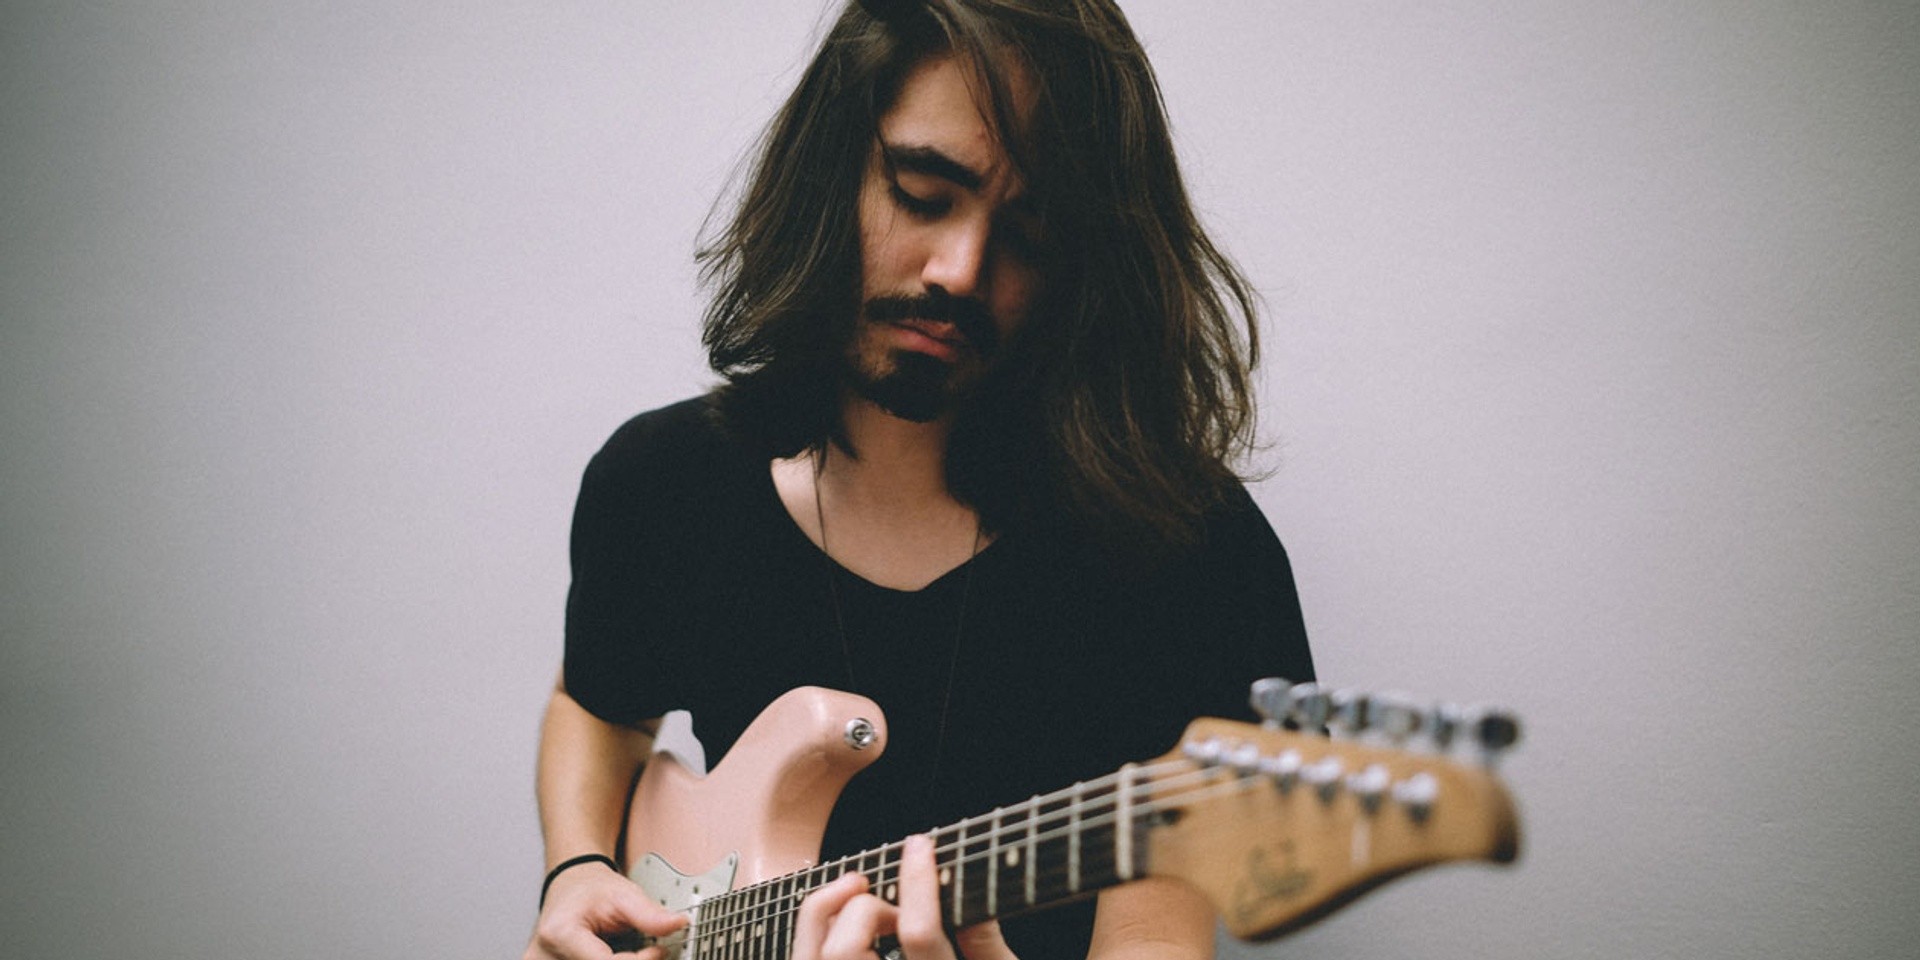 Here's how to get tickets to Mateus Asato's Manila concert this October